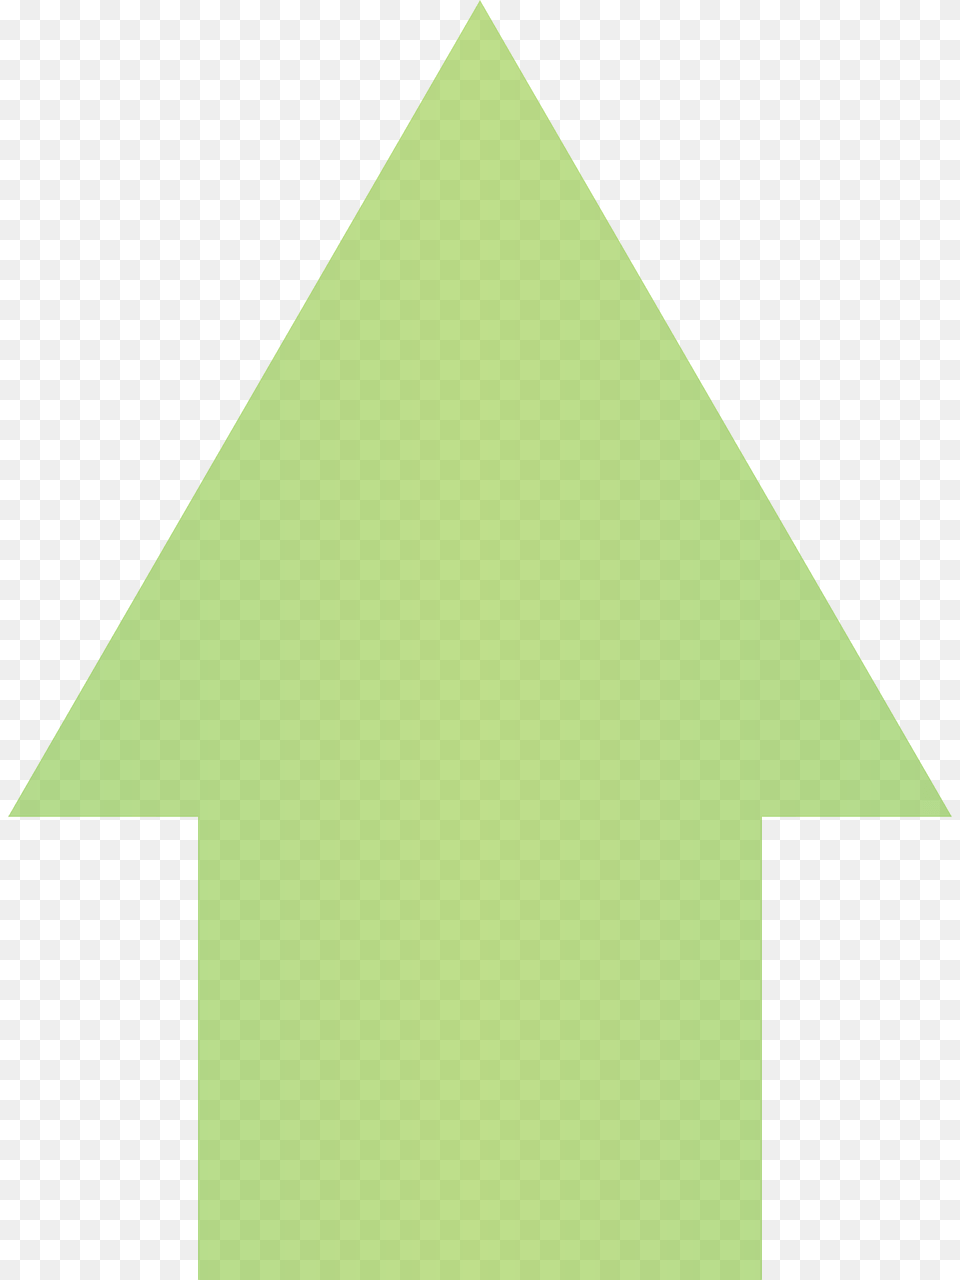 Up Upload Arrow Vector Graphic On Pixabay Green Transparent Background Arrow Up, Triangle Free Png